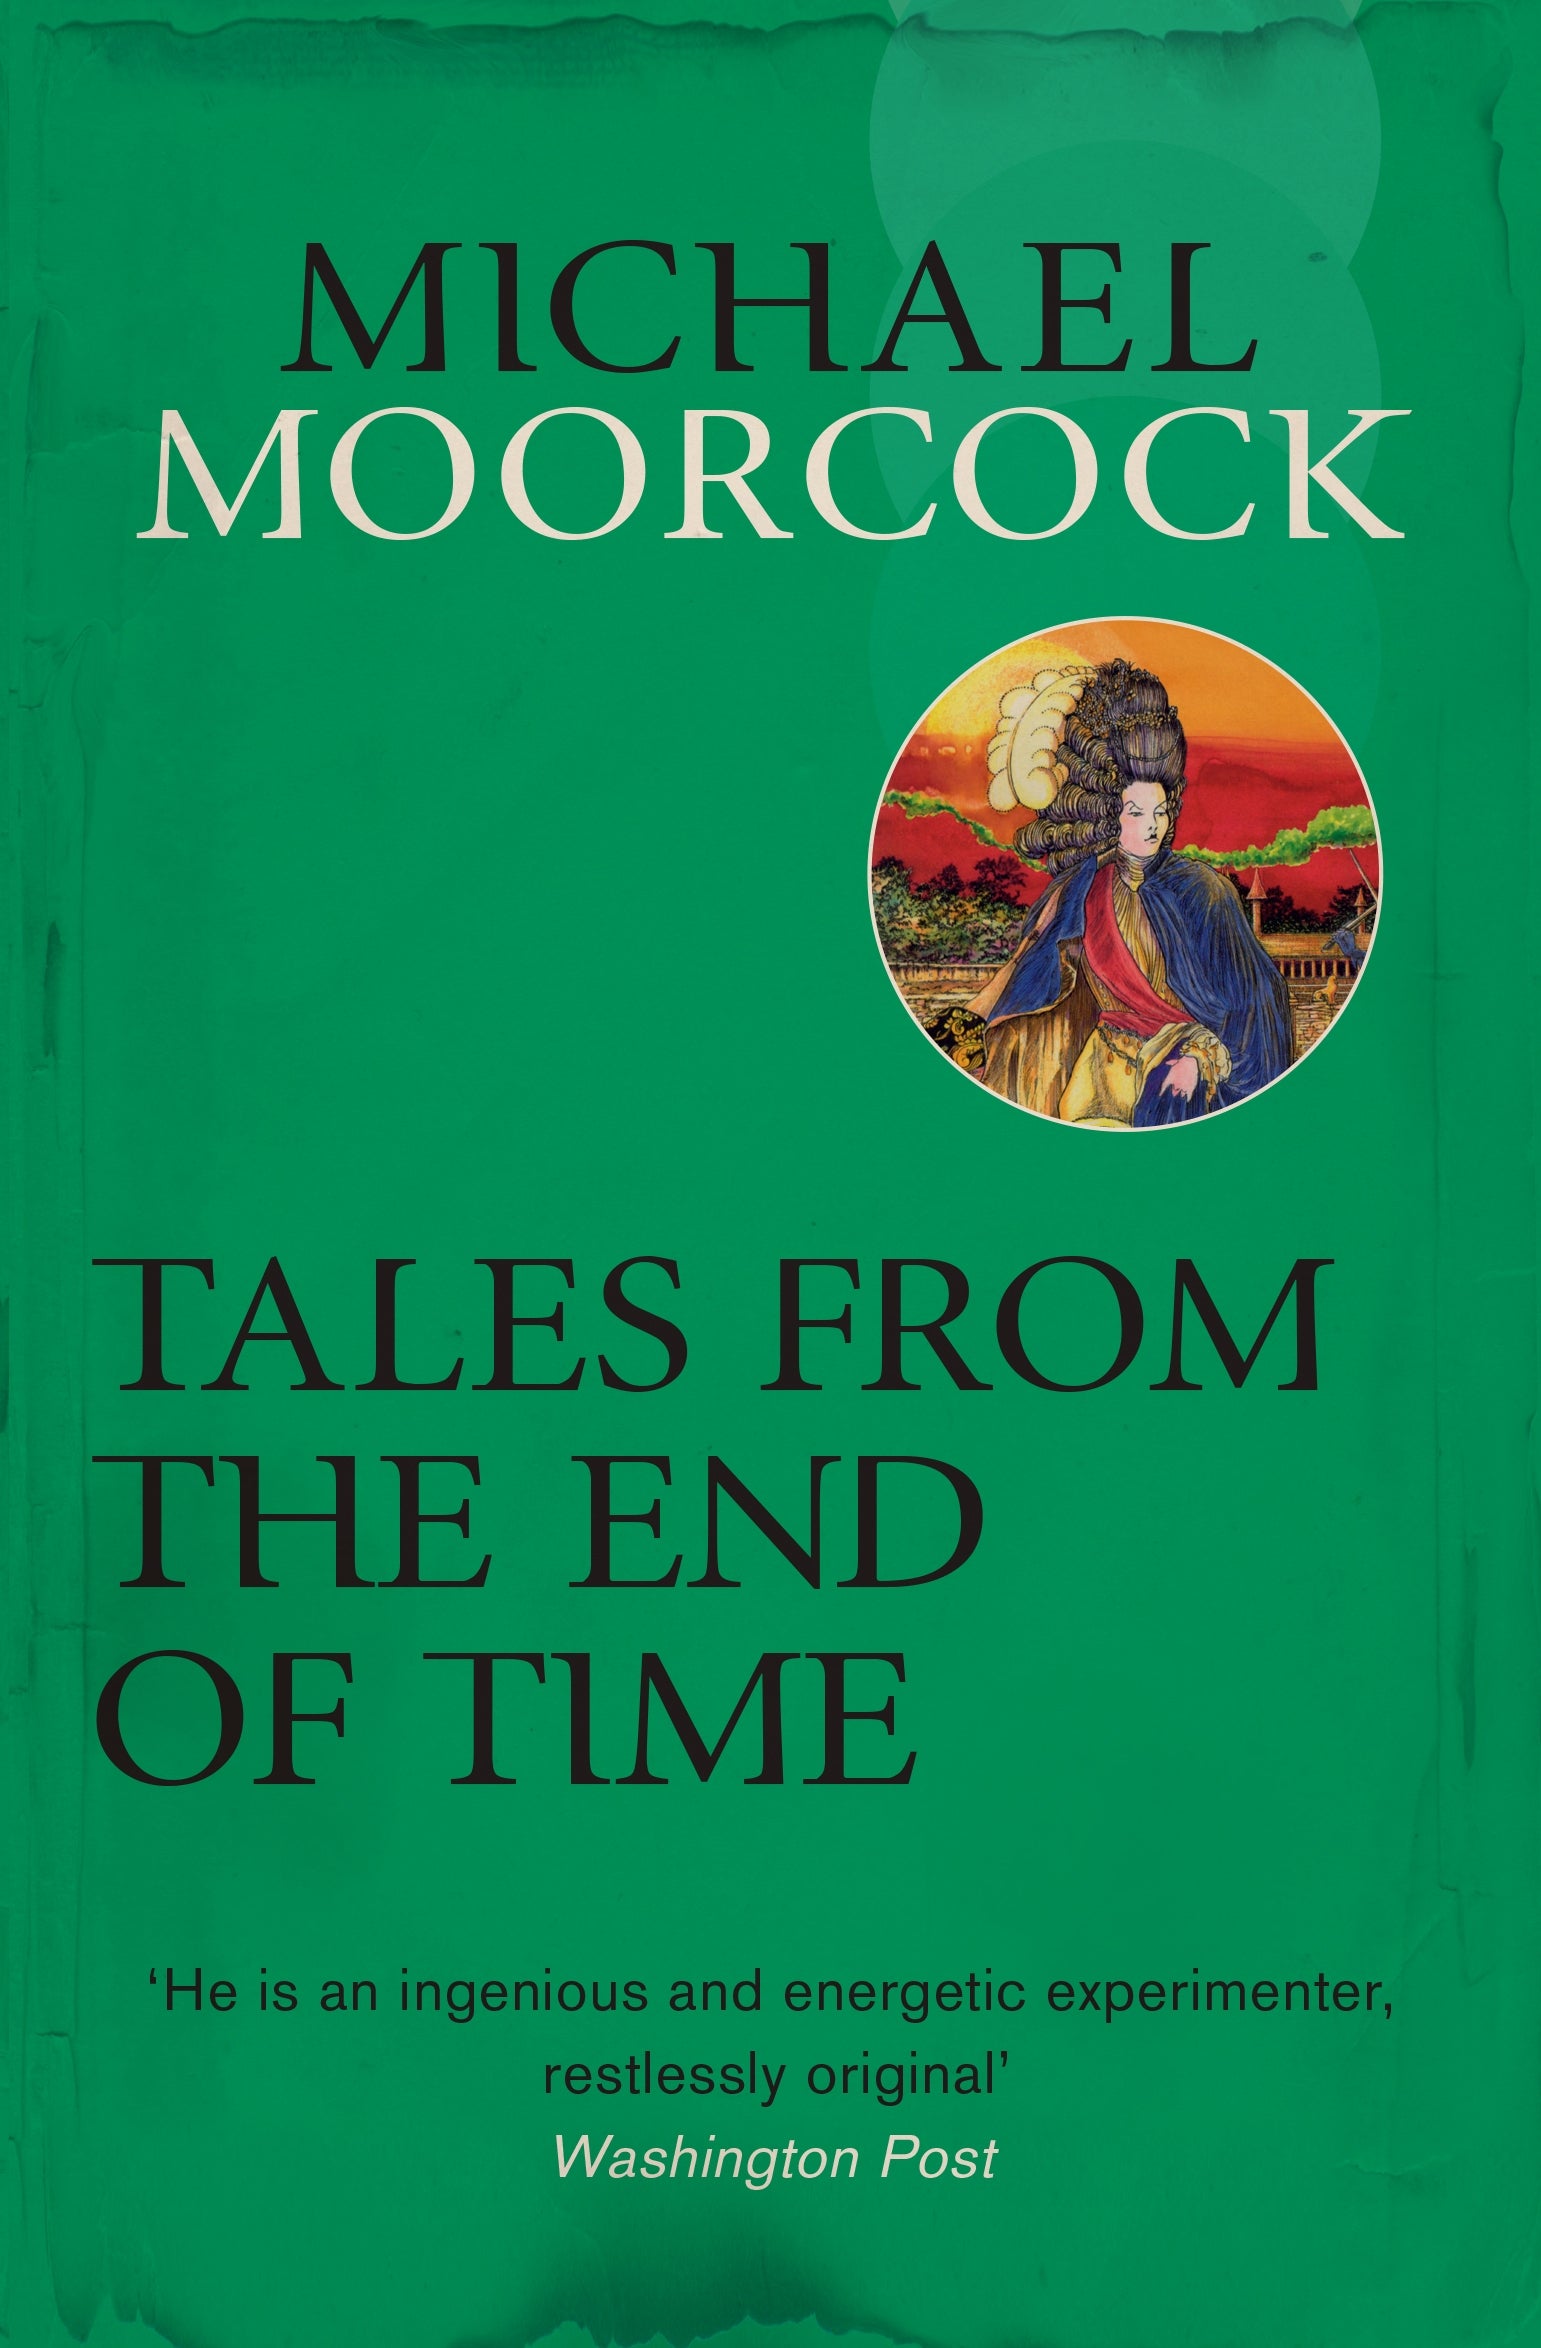 Tales From the End of Time by Michael Moorcock